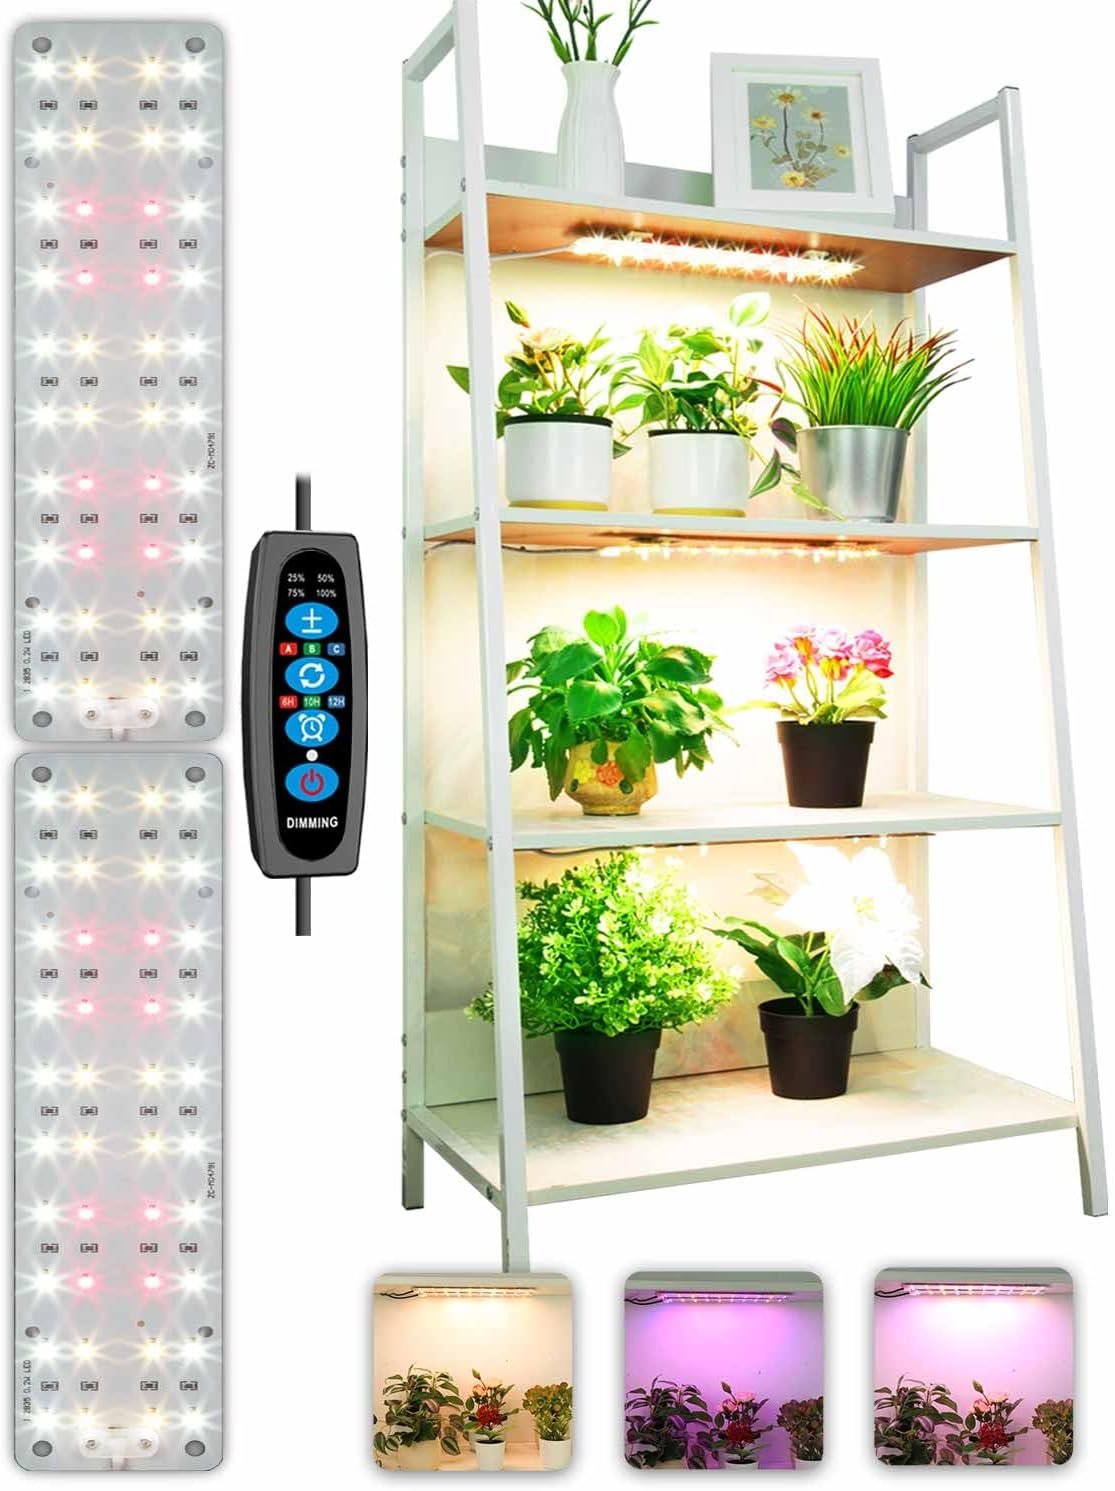 DOMMIA Grow Lights, Full Spectrum 12W(120W Equiv) for Indoor Plants, 84 LEDs Sunlike Plant Grow Light with On/Off Switch for Seed Starting, Hydroponics, Succulents  More, Easy to Assemble